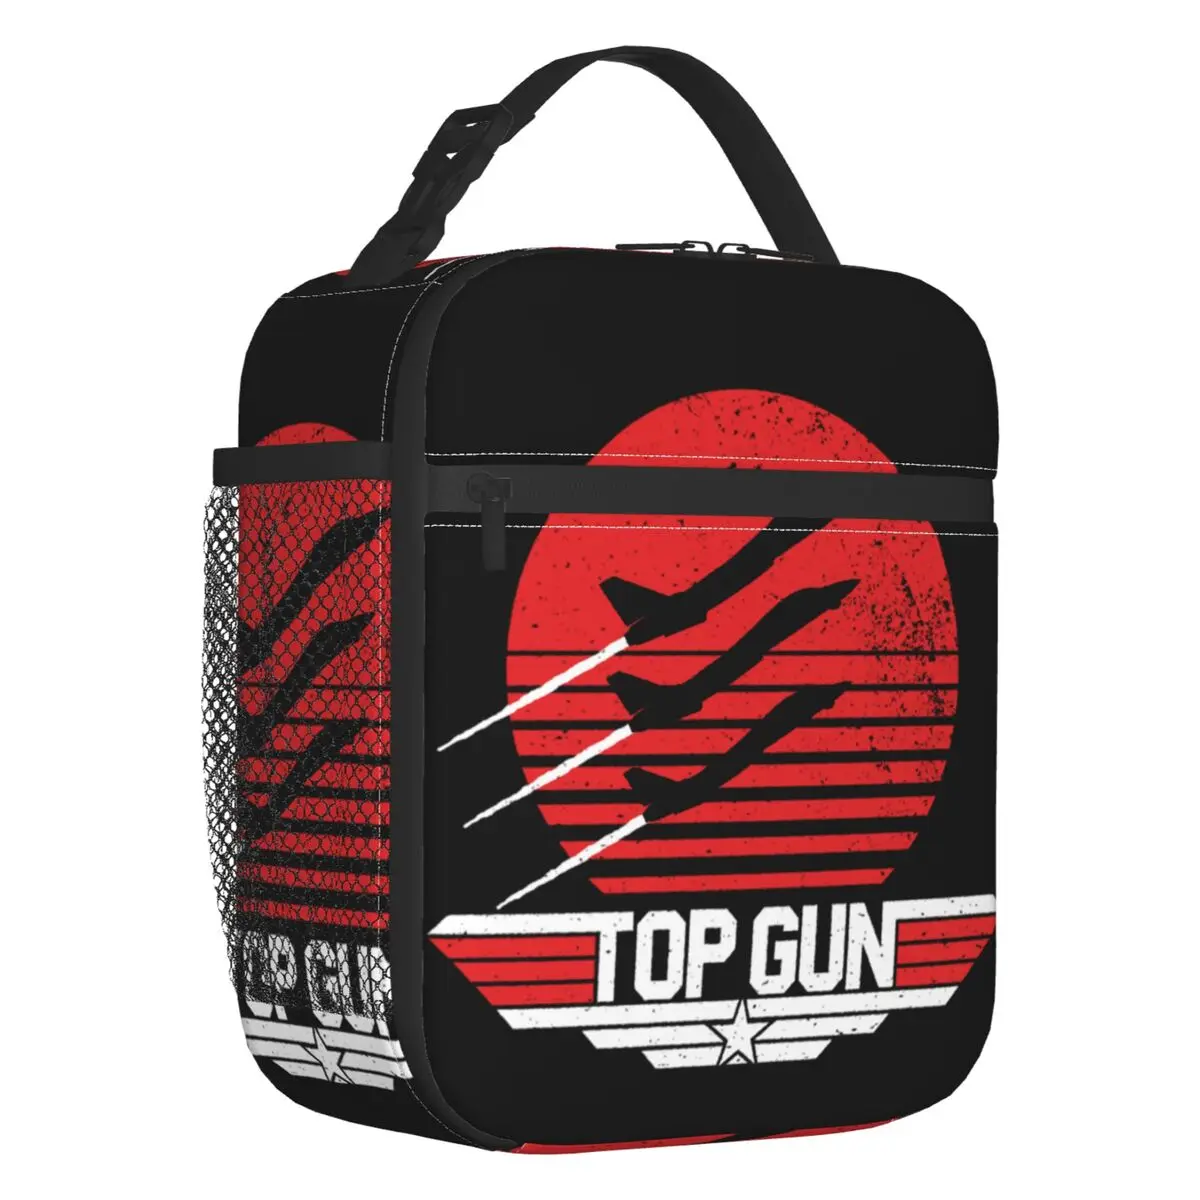 Maverick Film Top Gun Thermal Insulated Lunch Bag Women Topgun Resuable Lunch Container for School Outdoor Storage Food Box